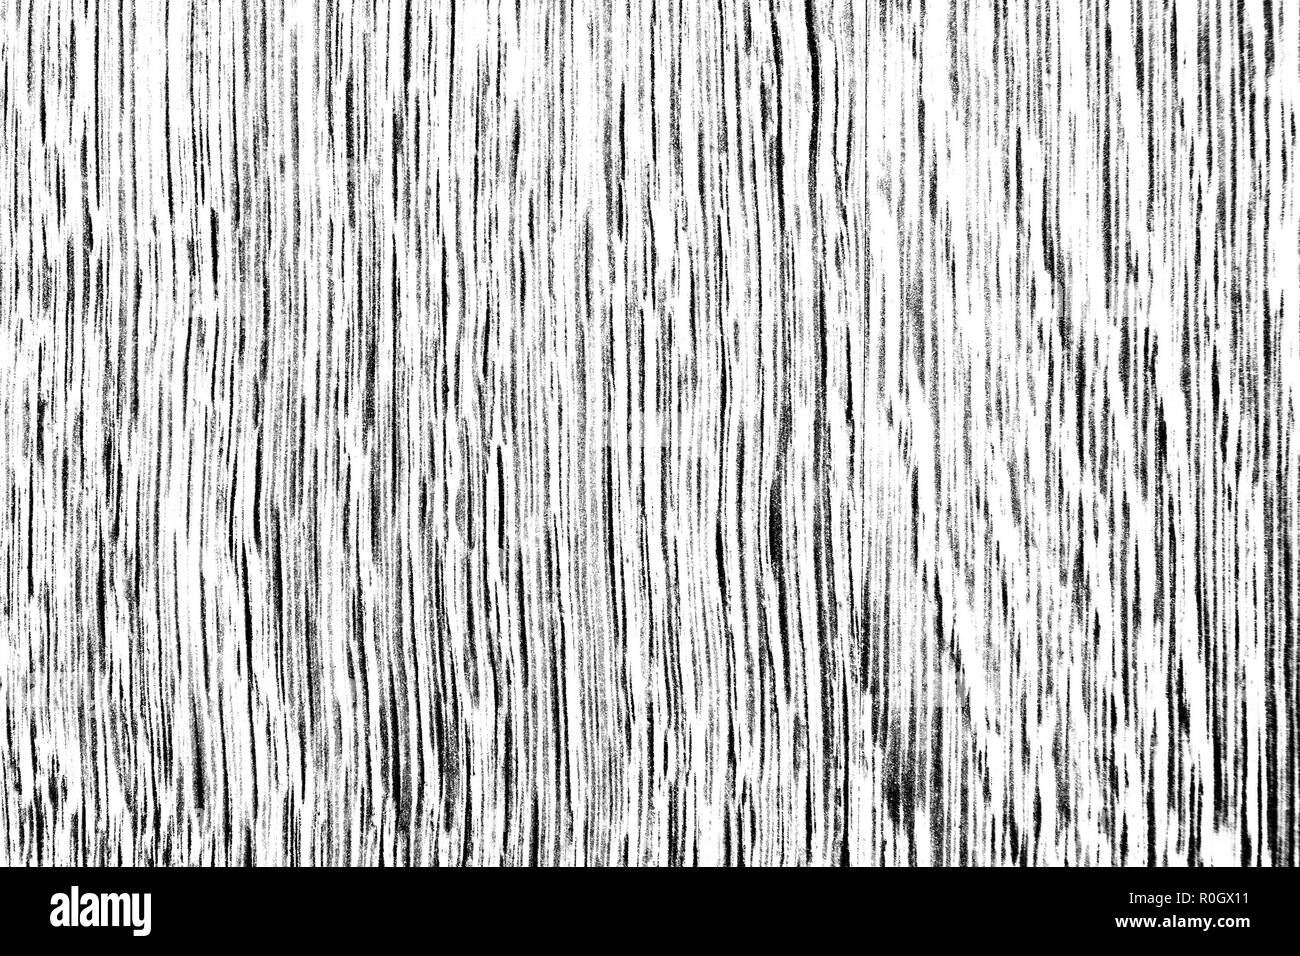 Black and white high contrast wooden texture, lengthwise cut vertically oriented Stock Photo